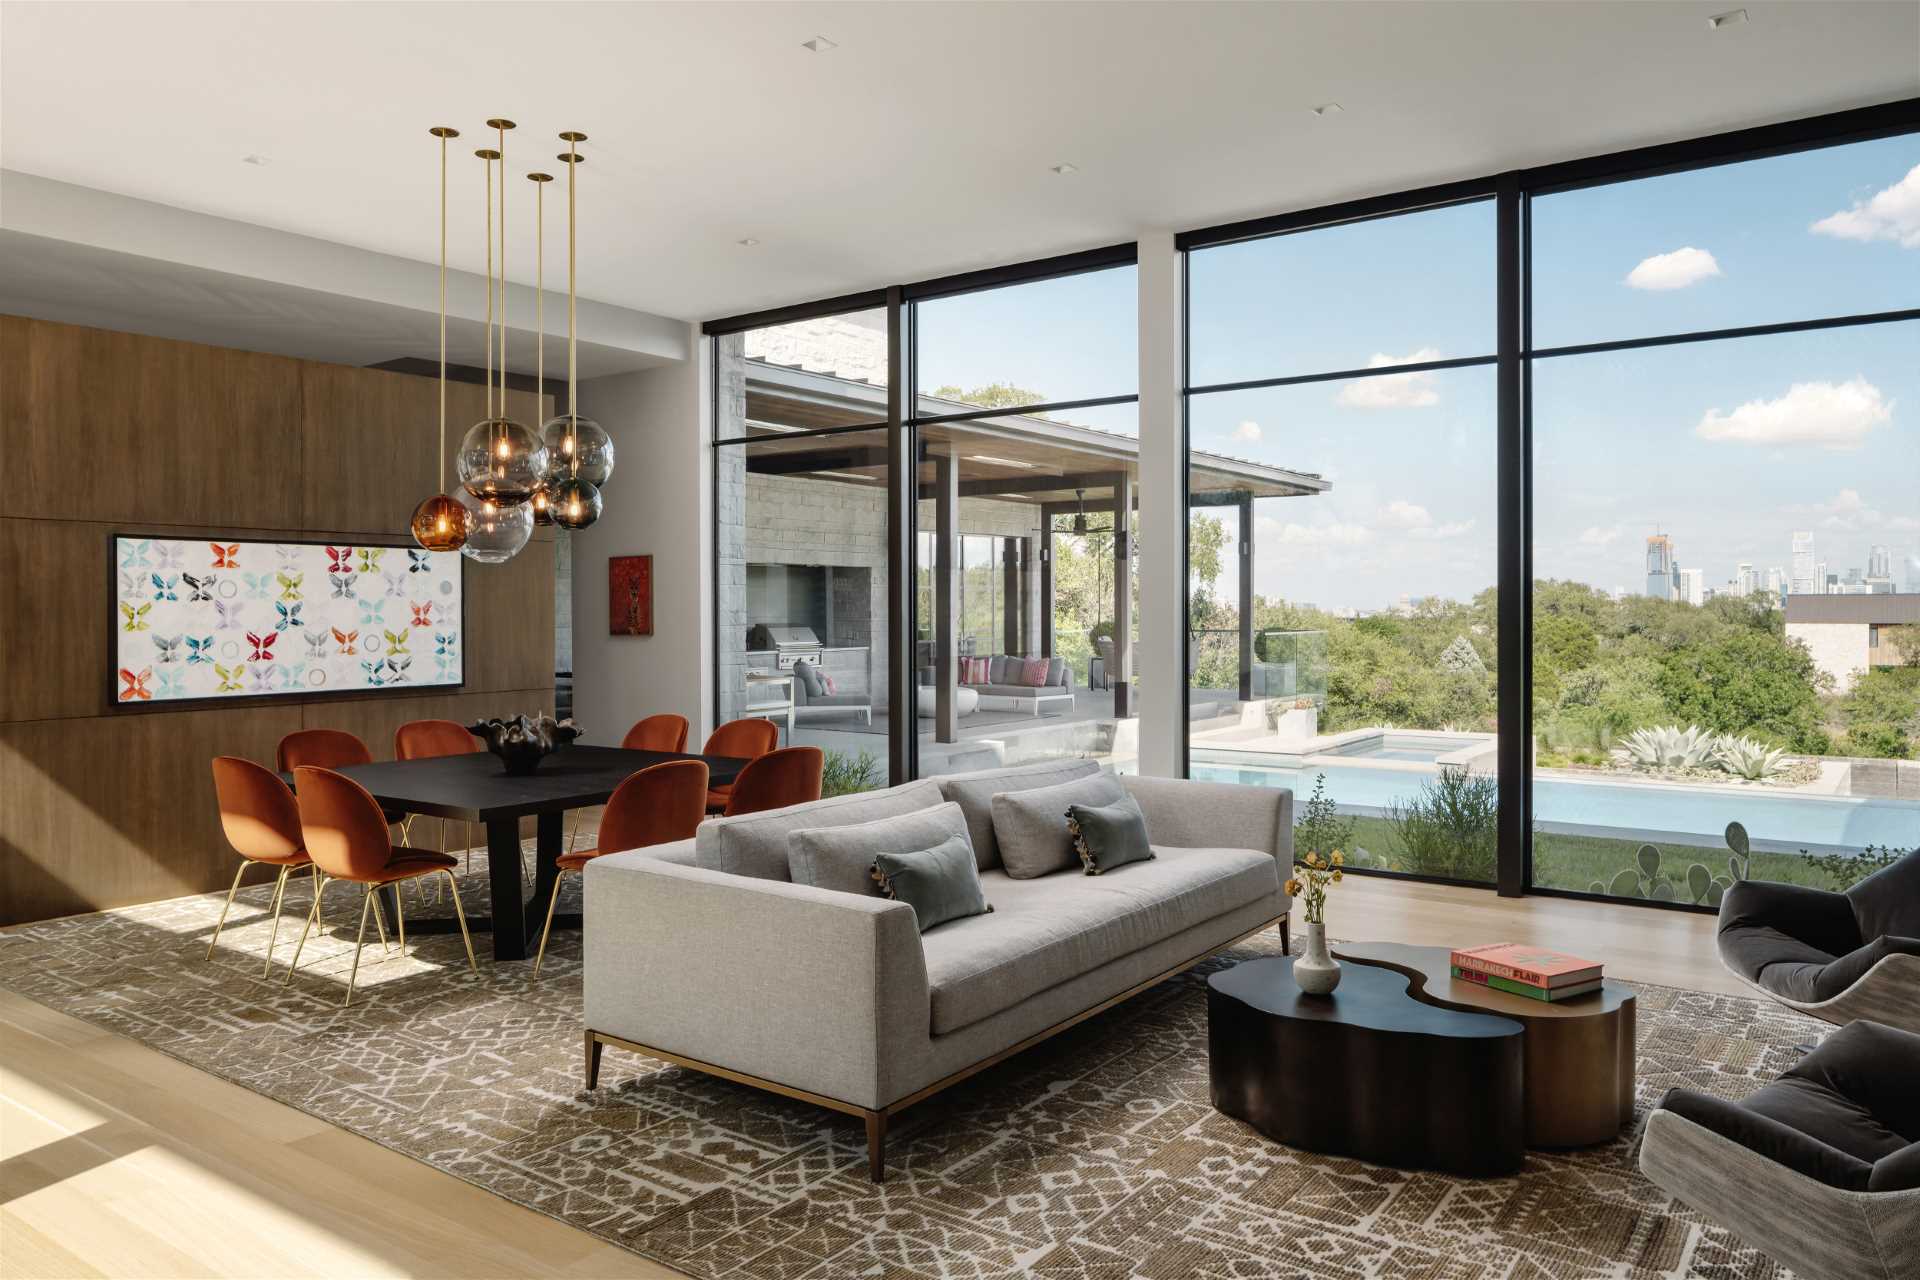 The main social areas of this modern home, like the living room, dining area, and kitchen, run parallel to the pool, while the primary suite and game room anchor these spaces to either side